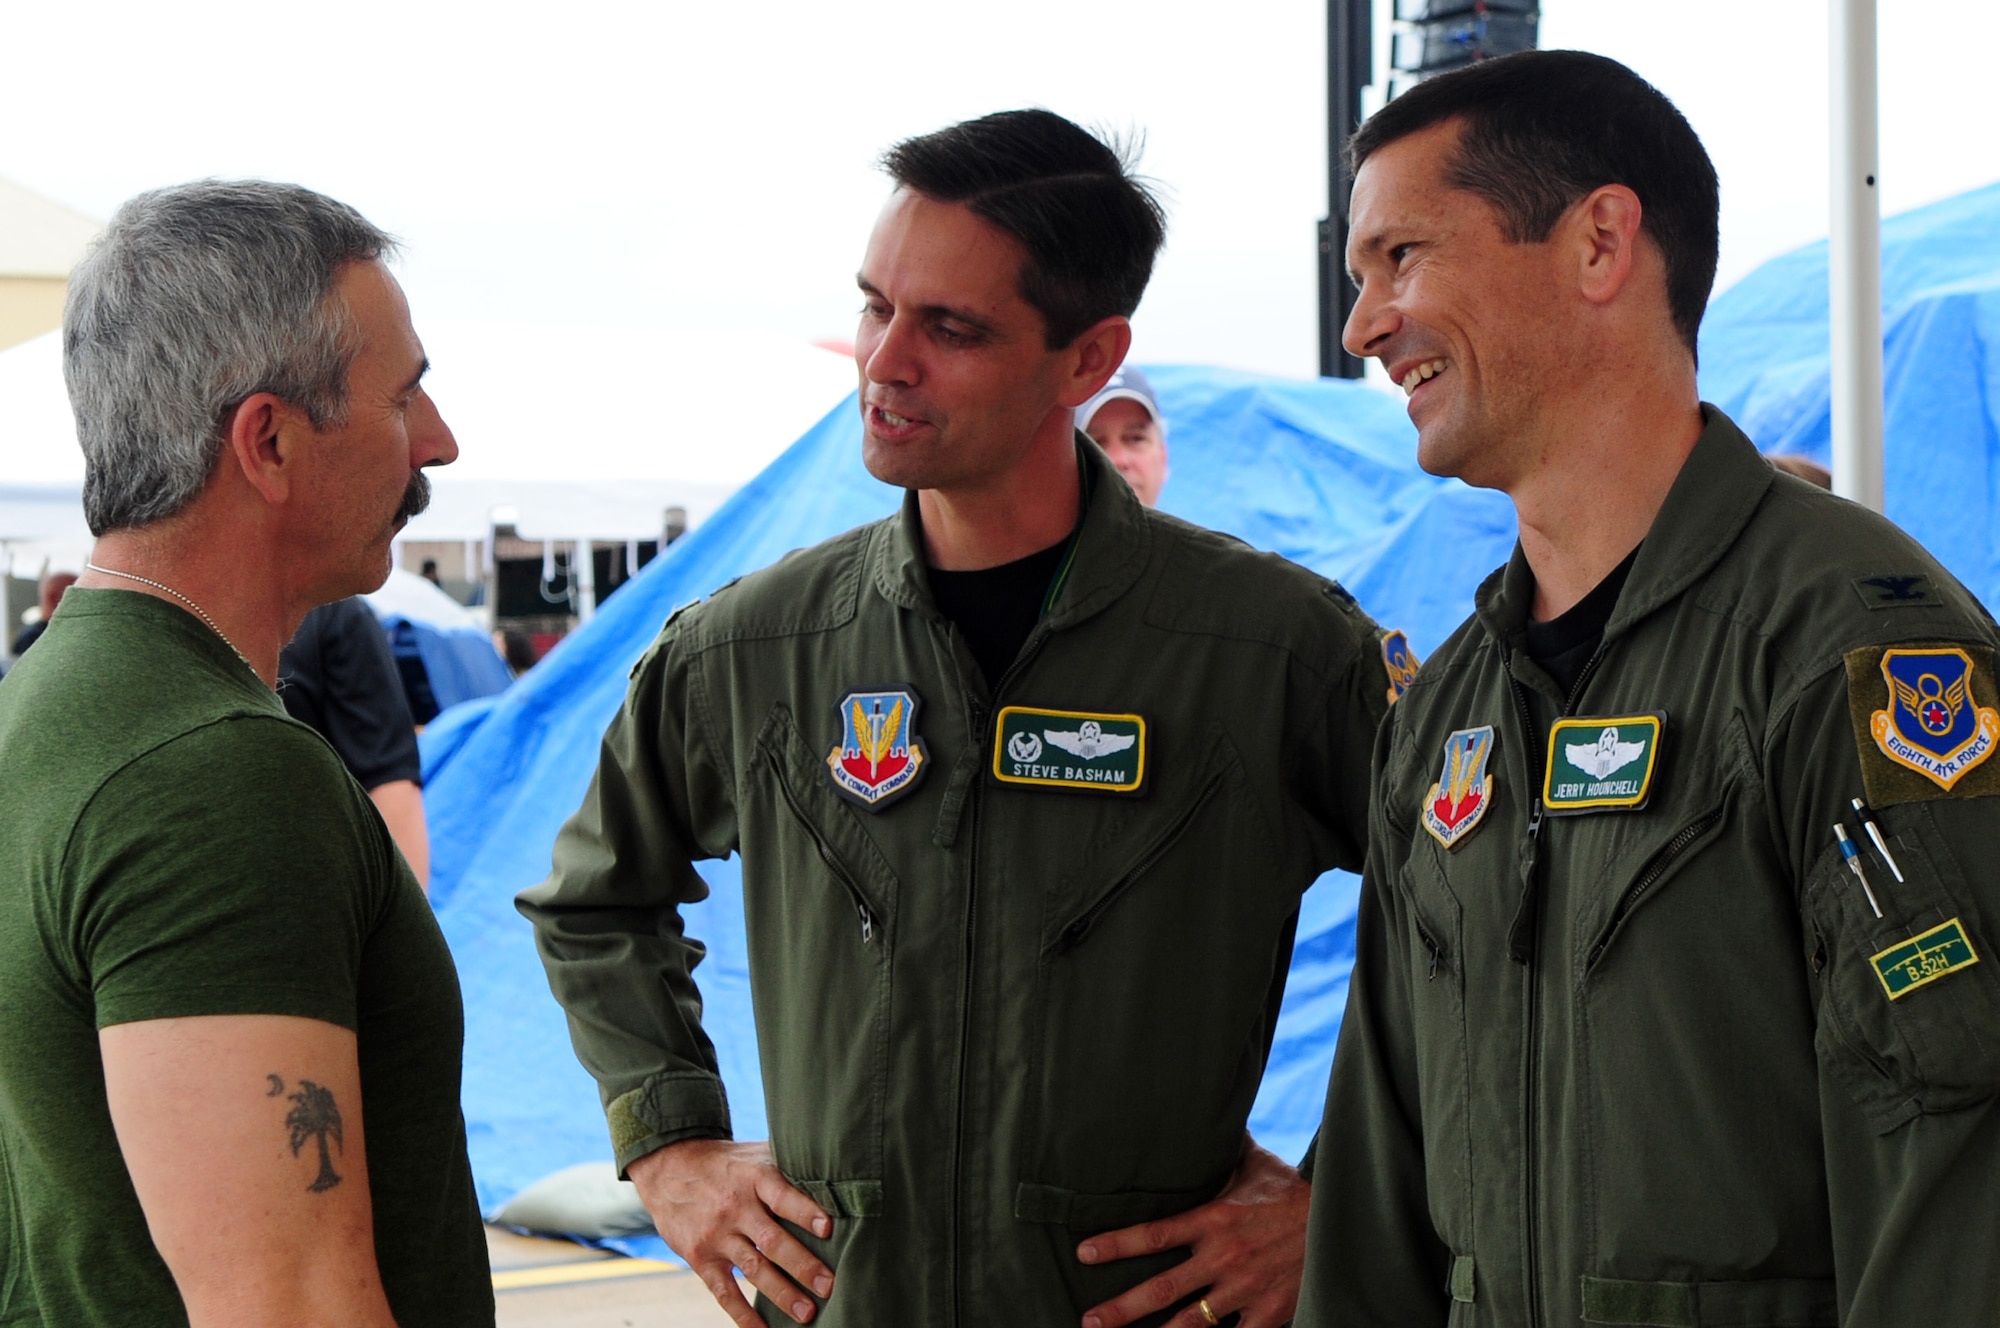 BARKSDALE AIR FORCE BASE, La. -- Country music recording artist Aaaron Tippen meets Col. Steven Basham, 2d Bomb Wing commander and Col. Gerald Hounchell prior to his performance on the final day of the Defenders of Liberty Air Show, May 10. More than 1,000 air show spectators waited through inclement weather to see Aaron perform on Mother's Day. (U.S. Air Force photo by Senior Airman Joanna M. Kresge)(Released)